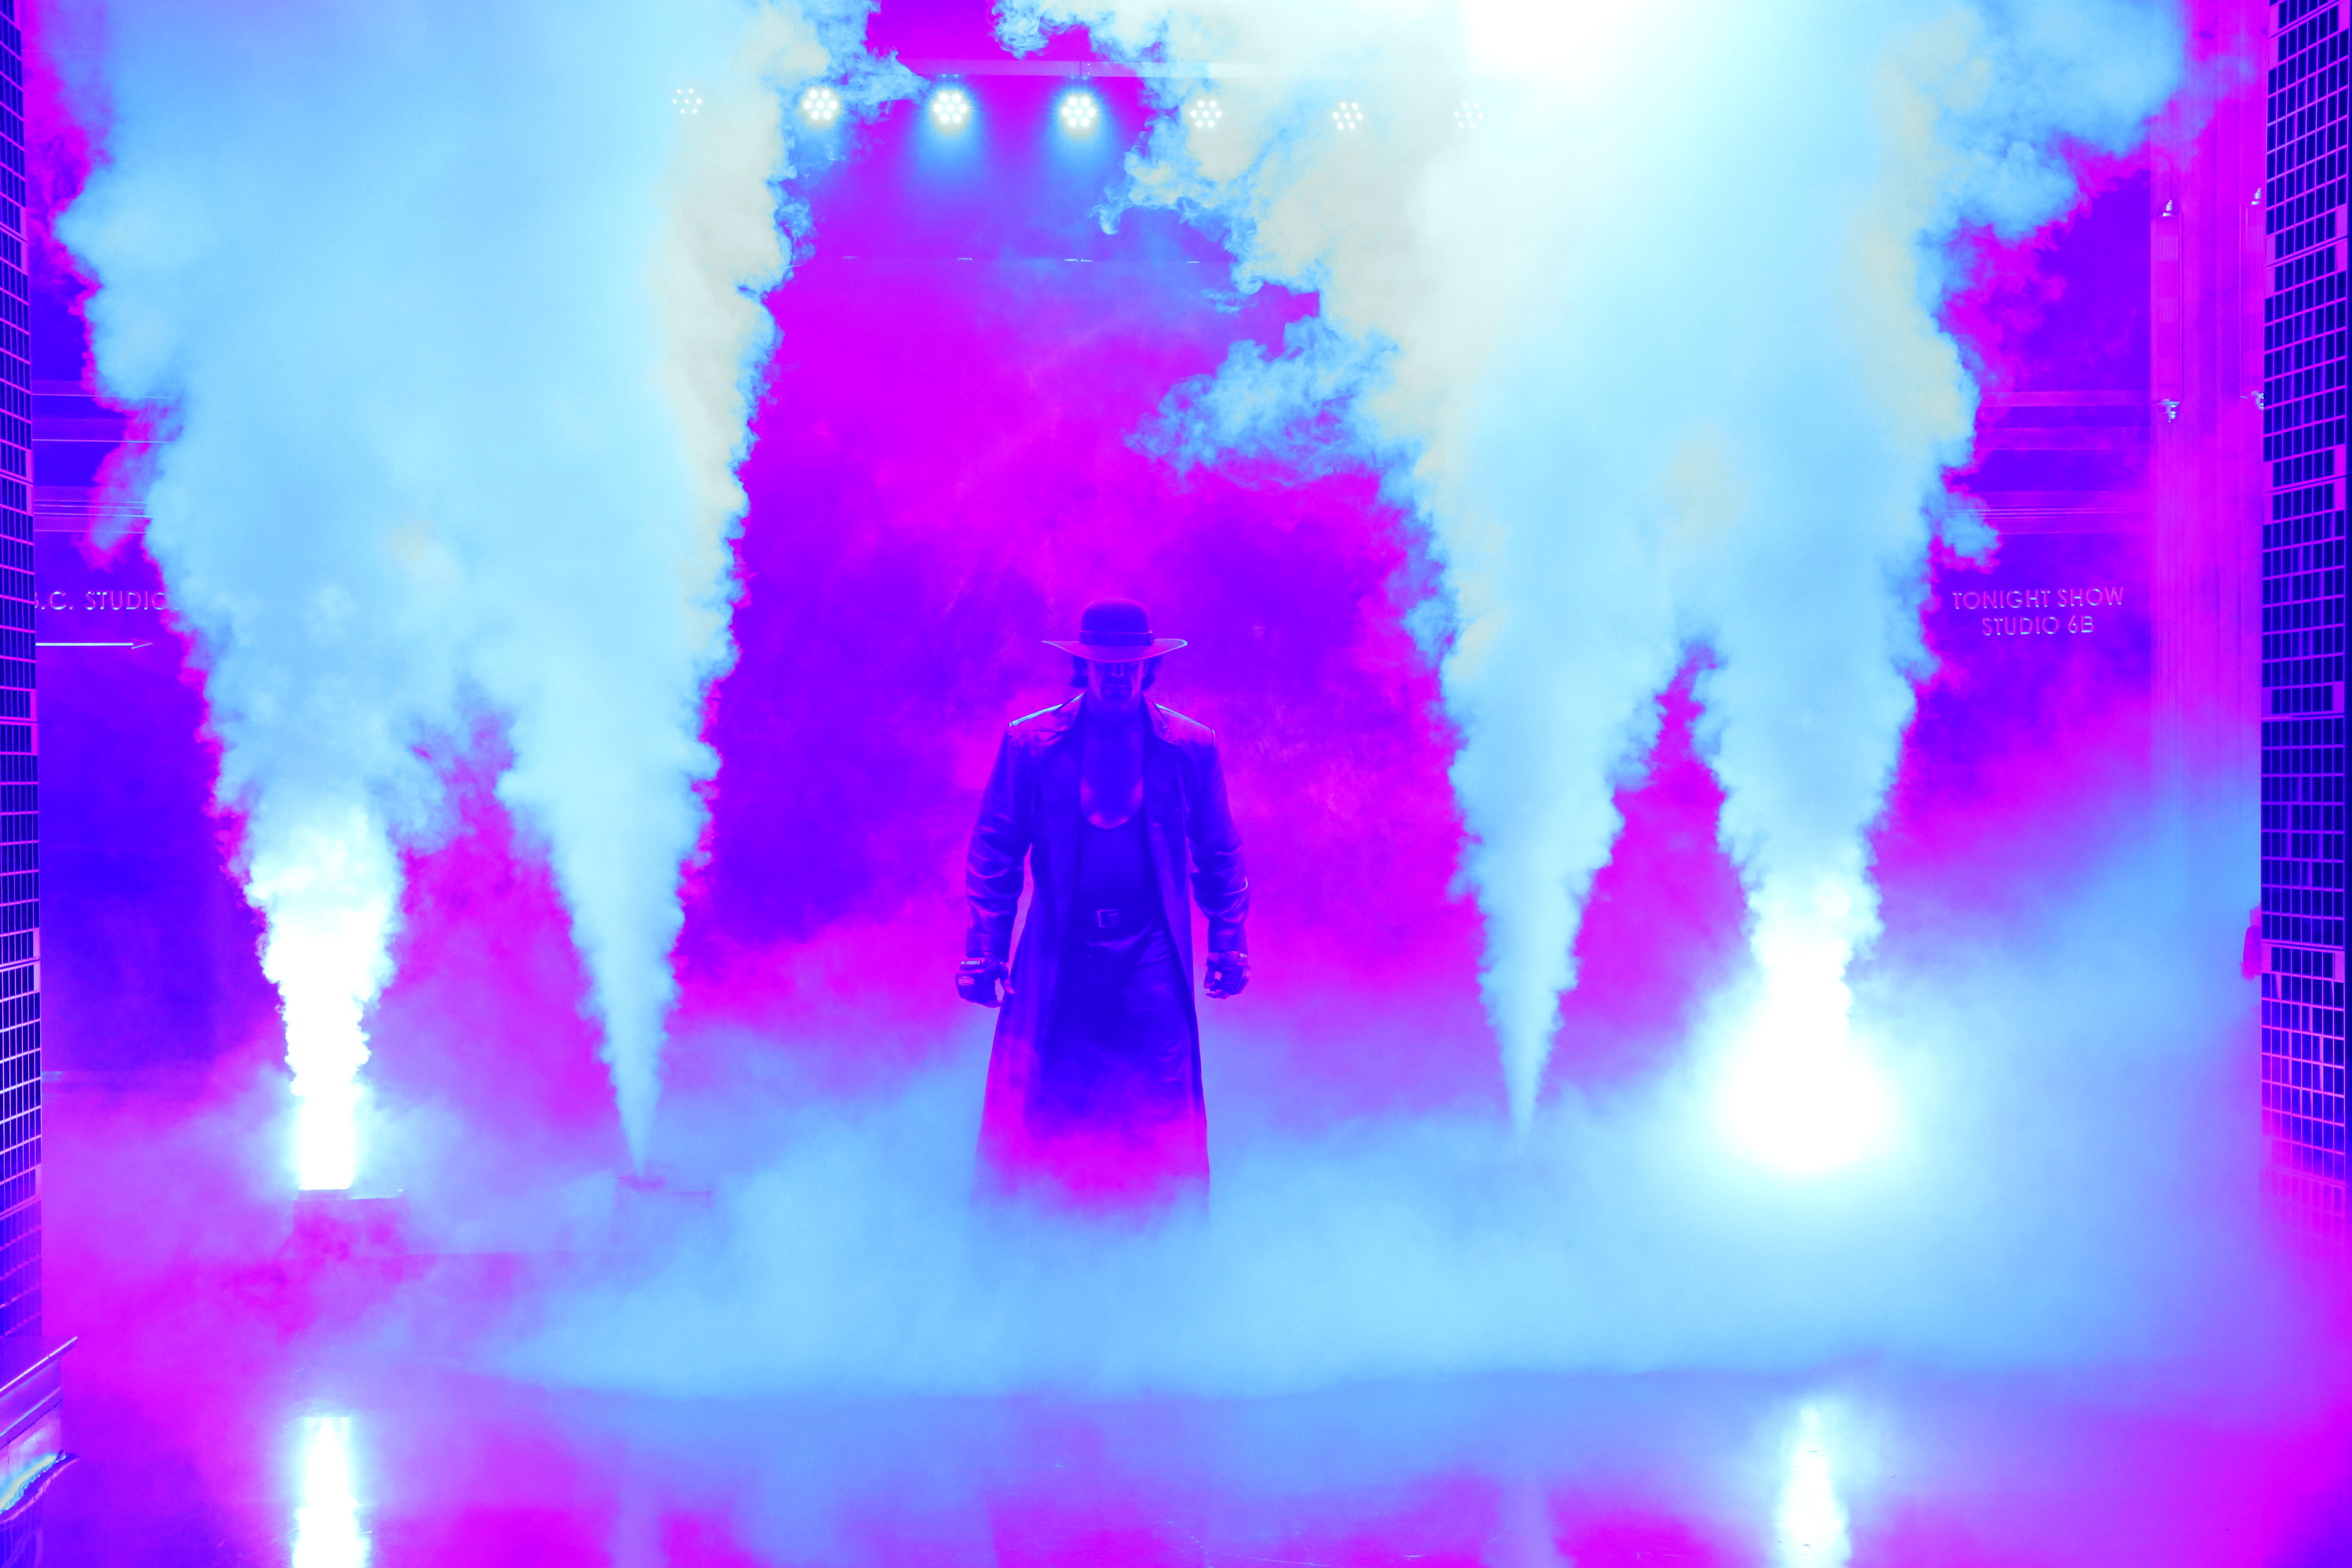 Power Outage At Dodger Stadium Causes The Undertaker’s Theme To Be Summoned (Video)